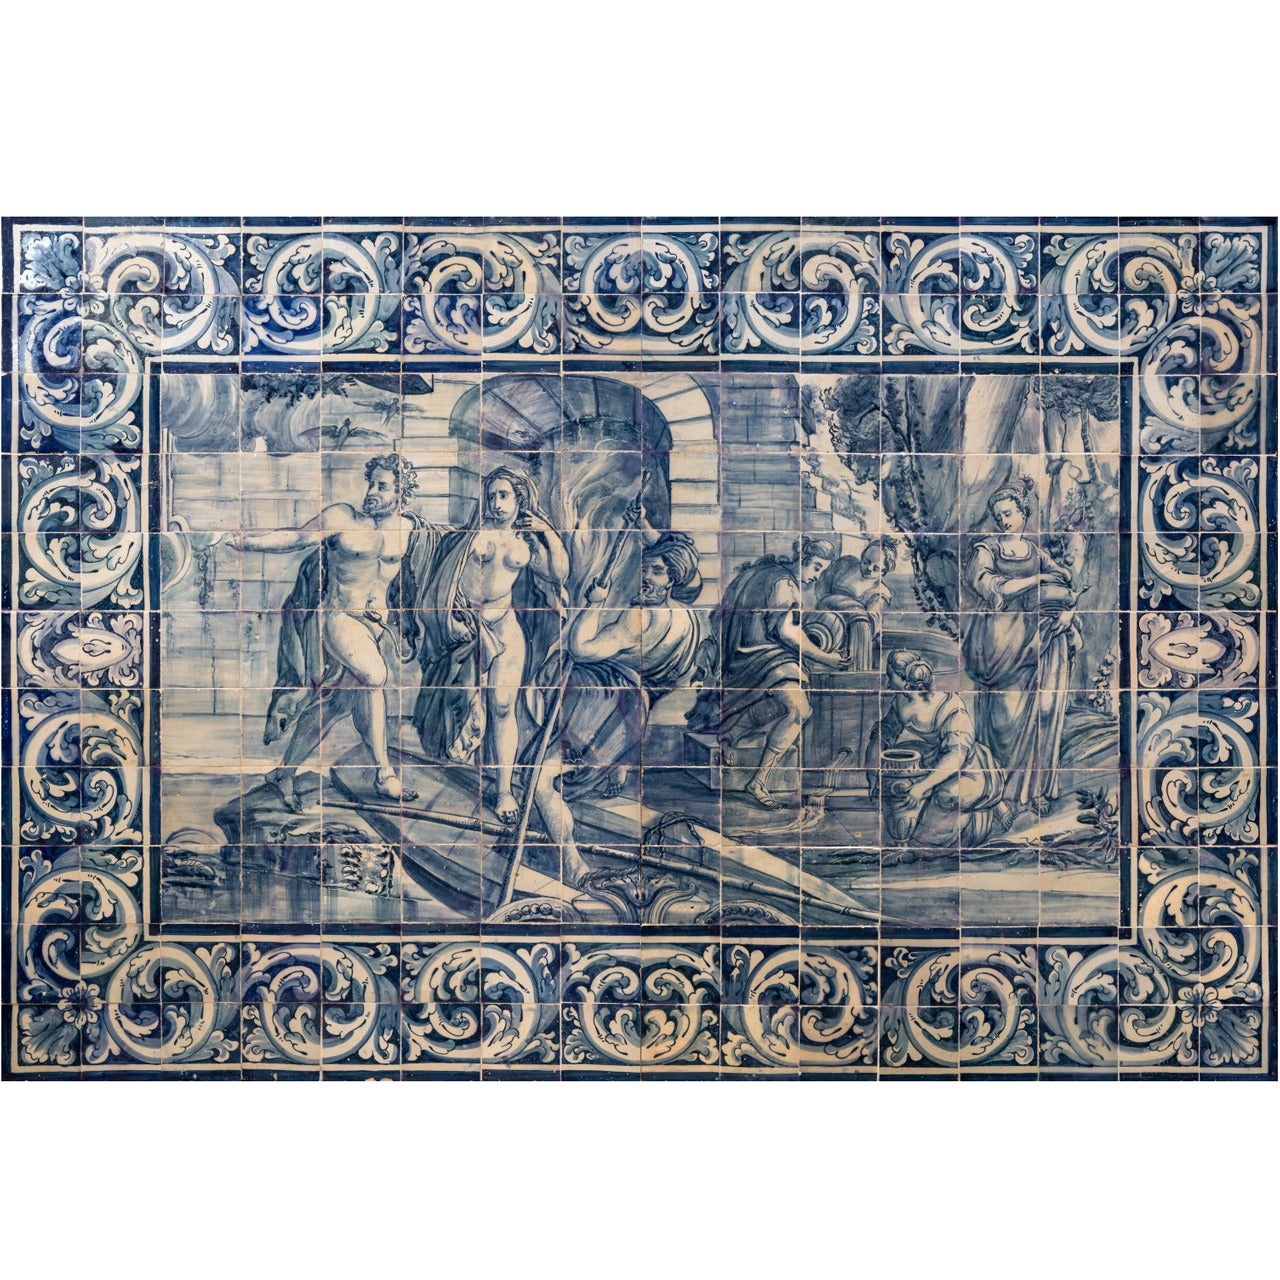 18th Century Portuguese Blue on White Tile Panel, Works of Hercules